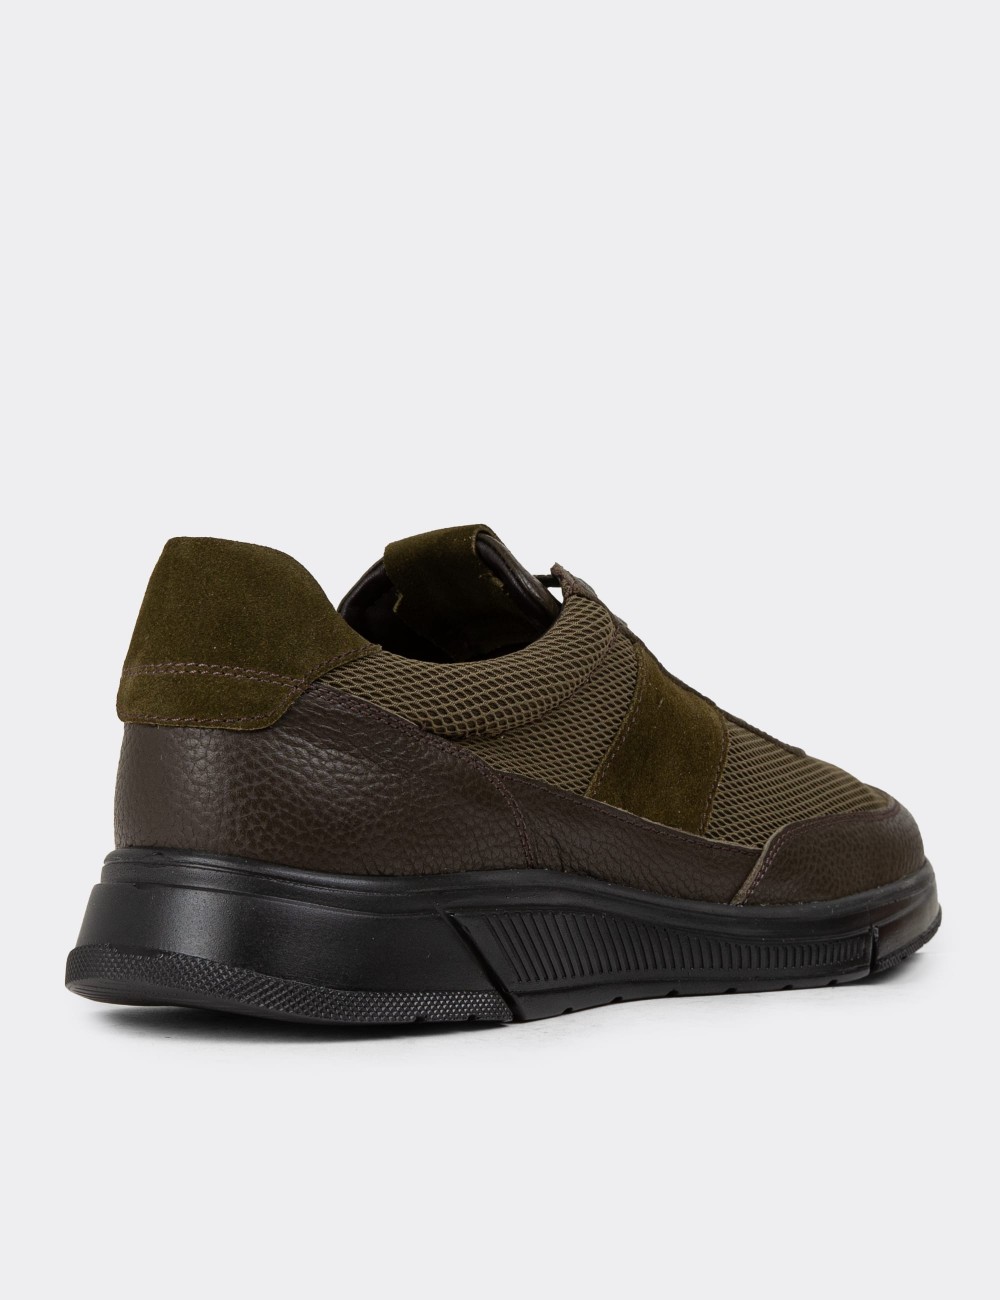 Green Leather Sneakers - 01963MYSLC01